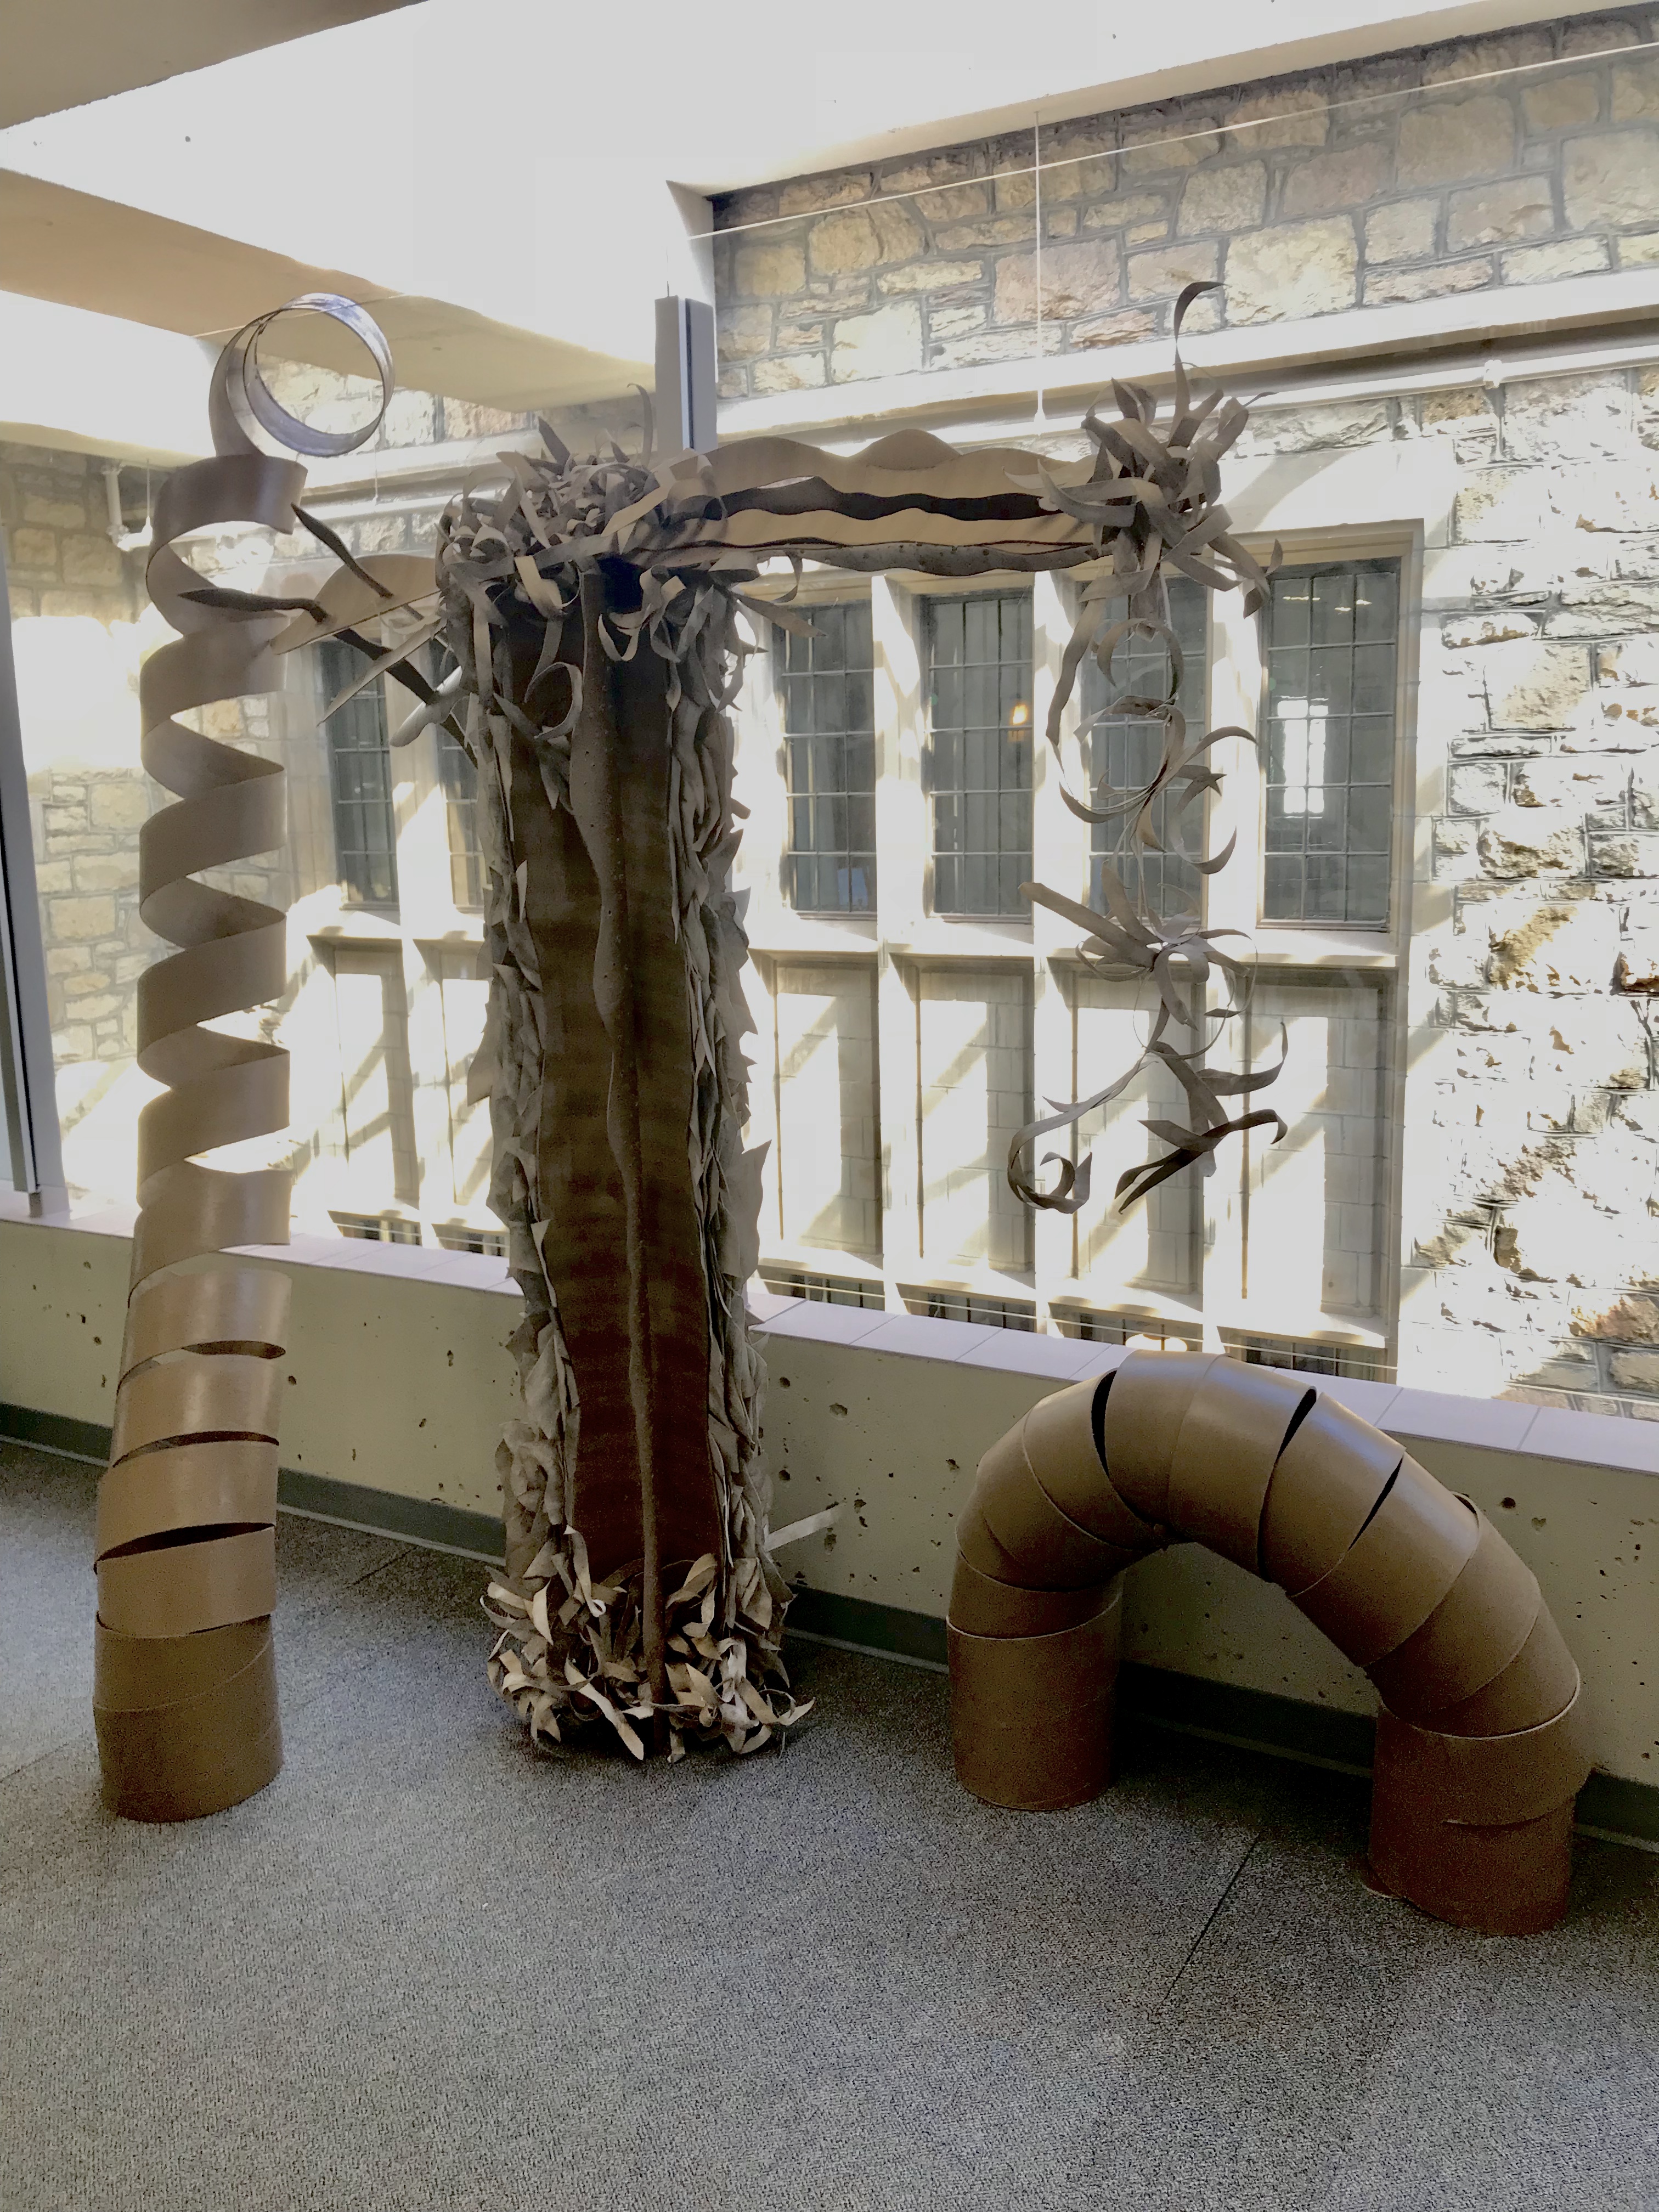 An sculpture created from discarded paper tubes for ARTCycled 2018 by Hailey Jones